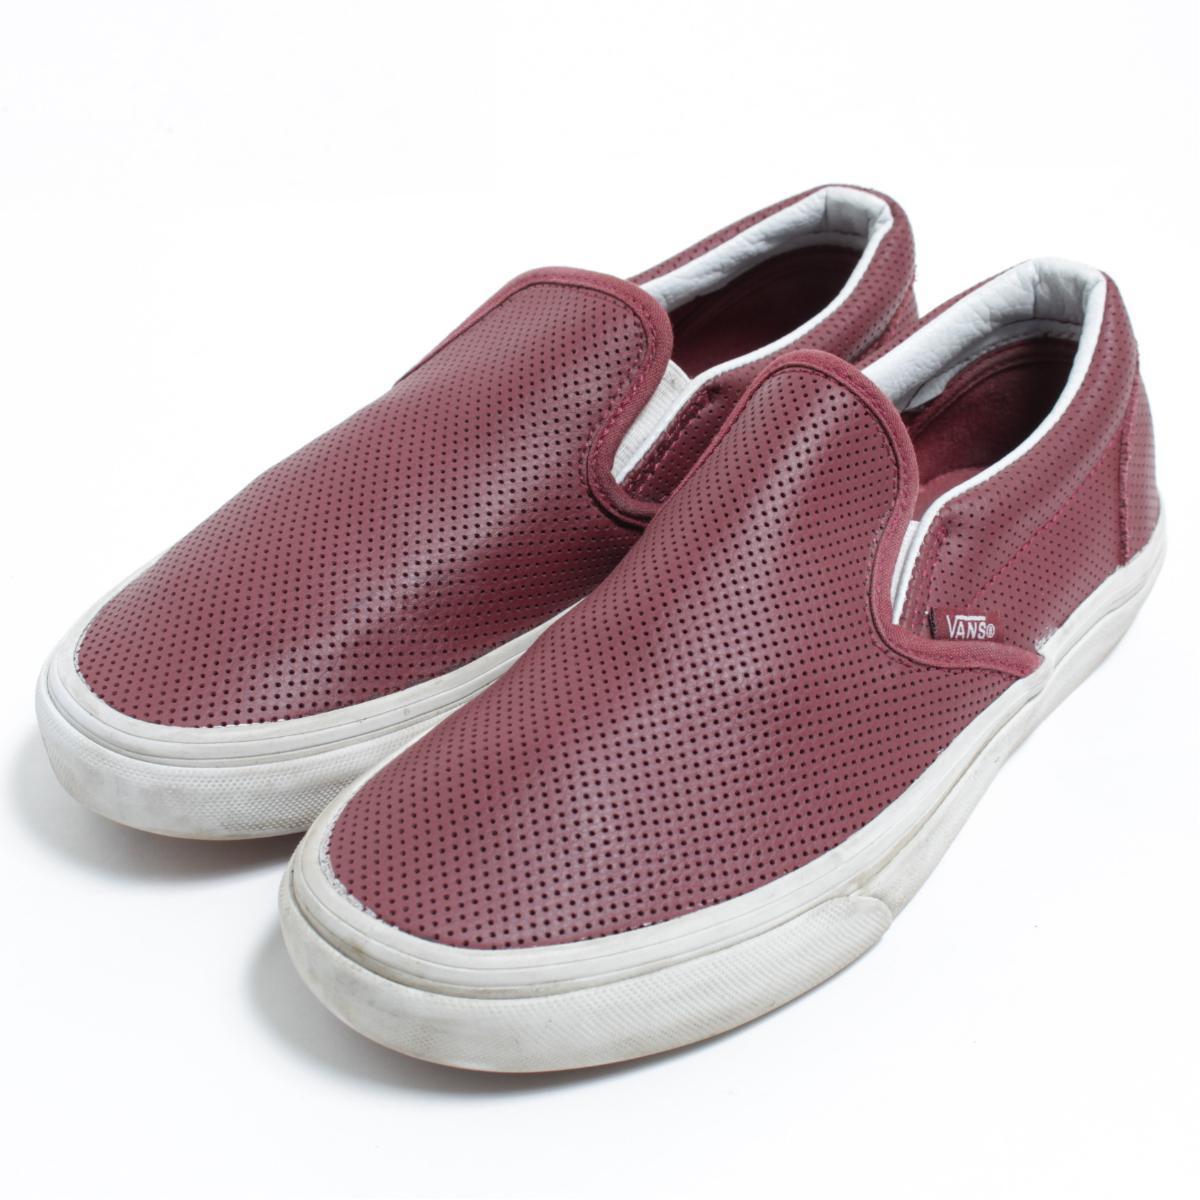 red leather slip on vans cheap online